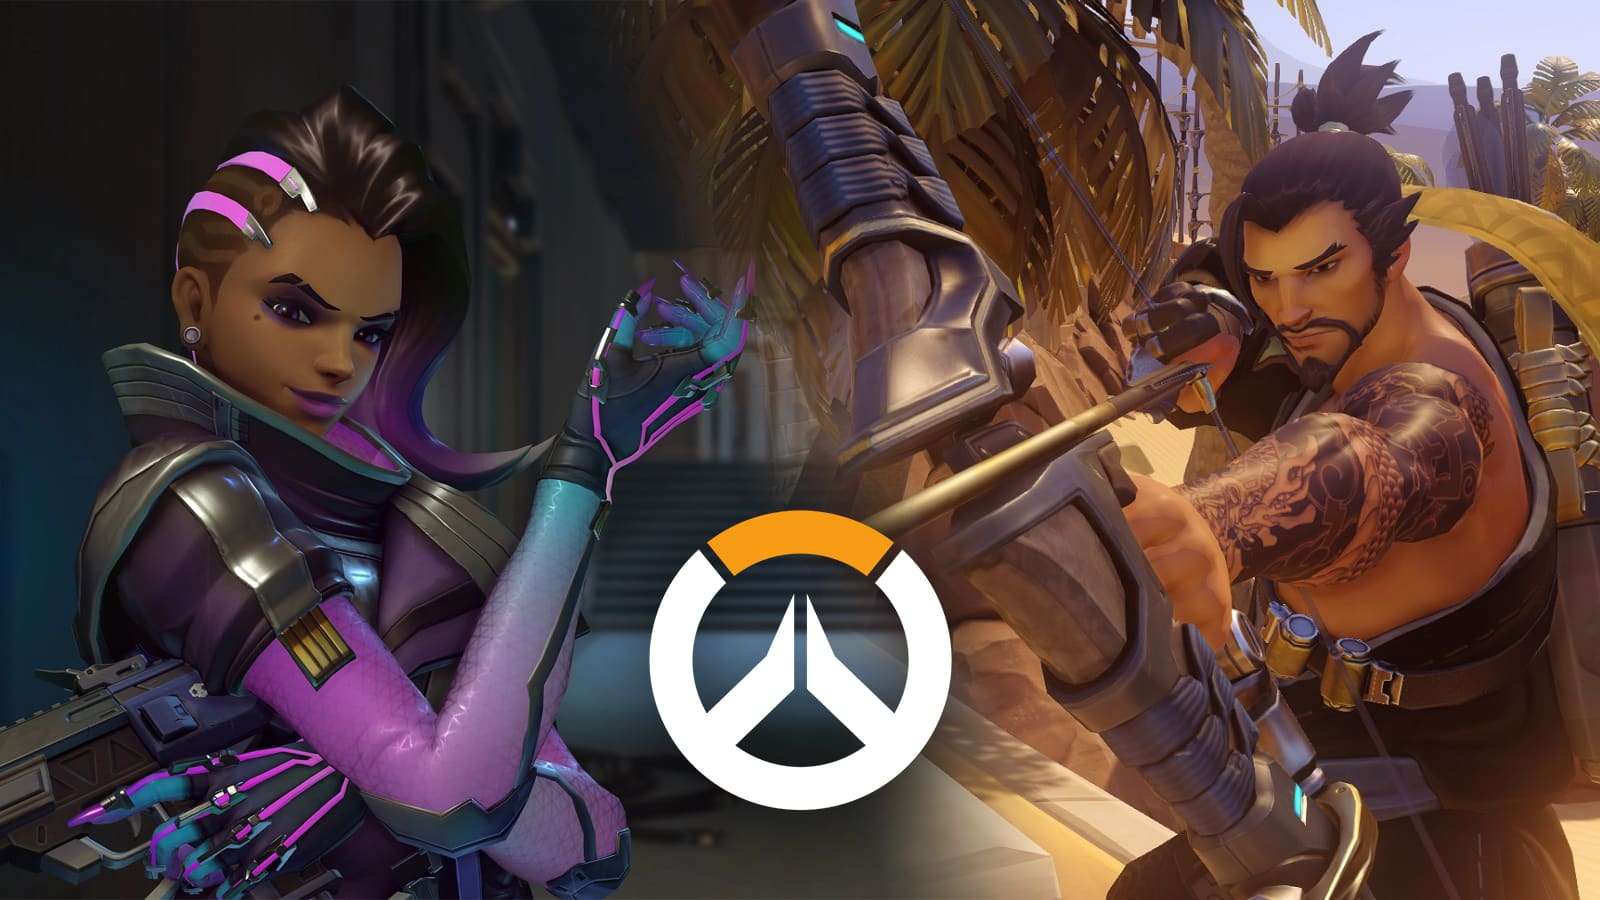 Sombra and Hanzo in Overwatch